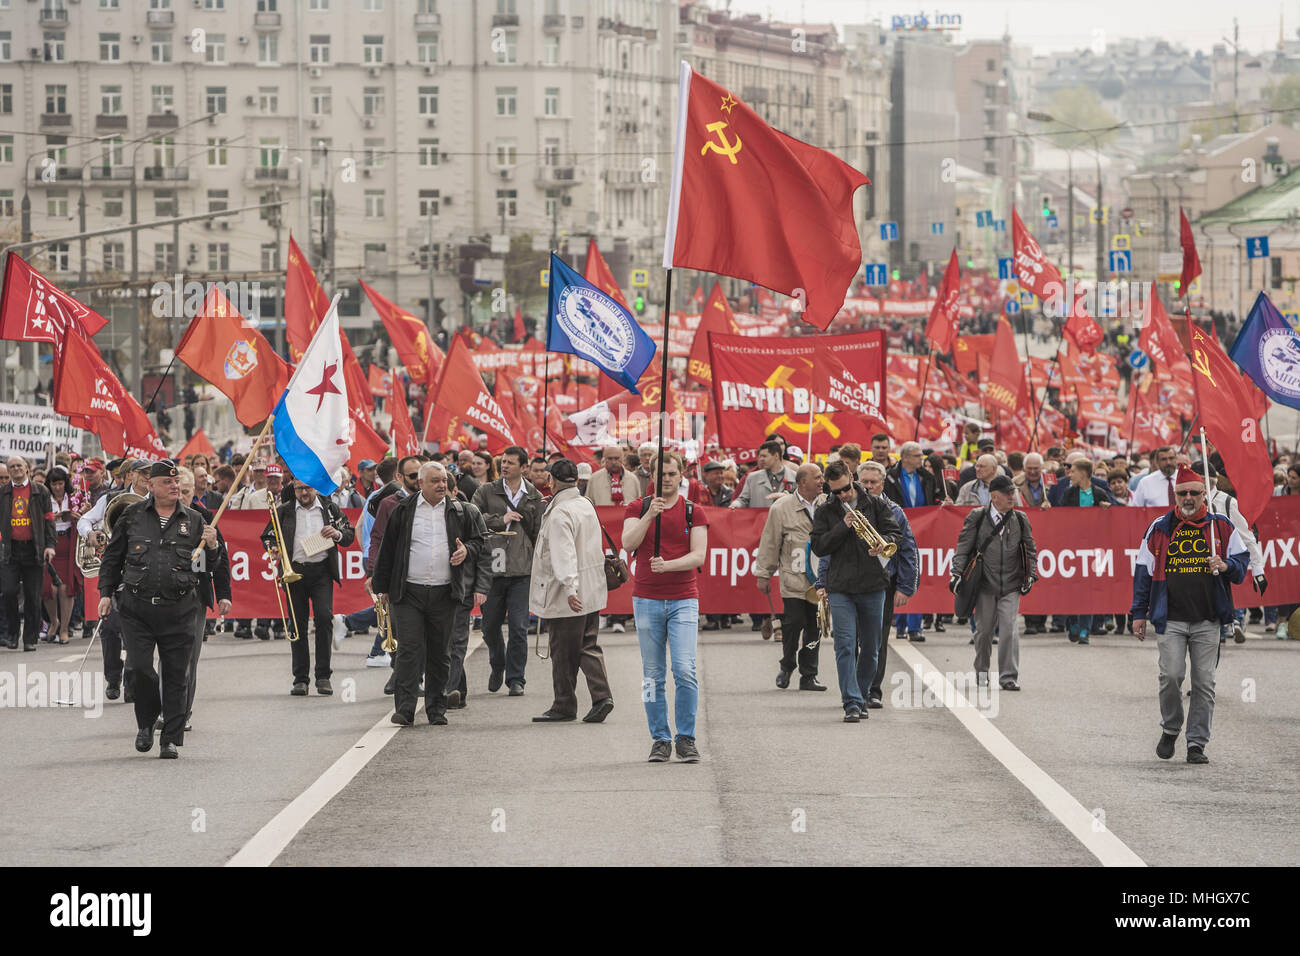 The 1st of May in Russia. The 1st May Demonstration on the Red Square at 1929. 1 мая россия выходной